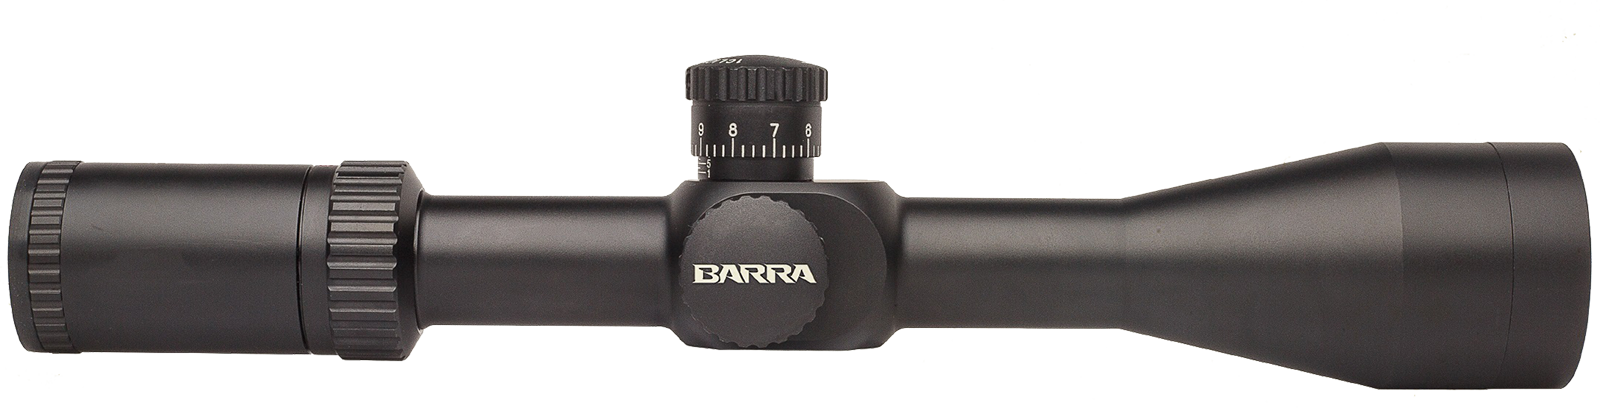 Barra Hunting Scopes Can Take You There - Kahles K525i (1600x408), Png Download